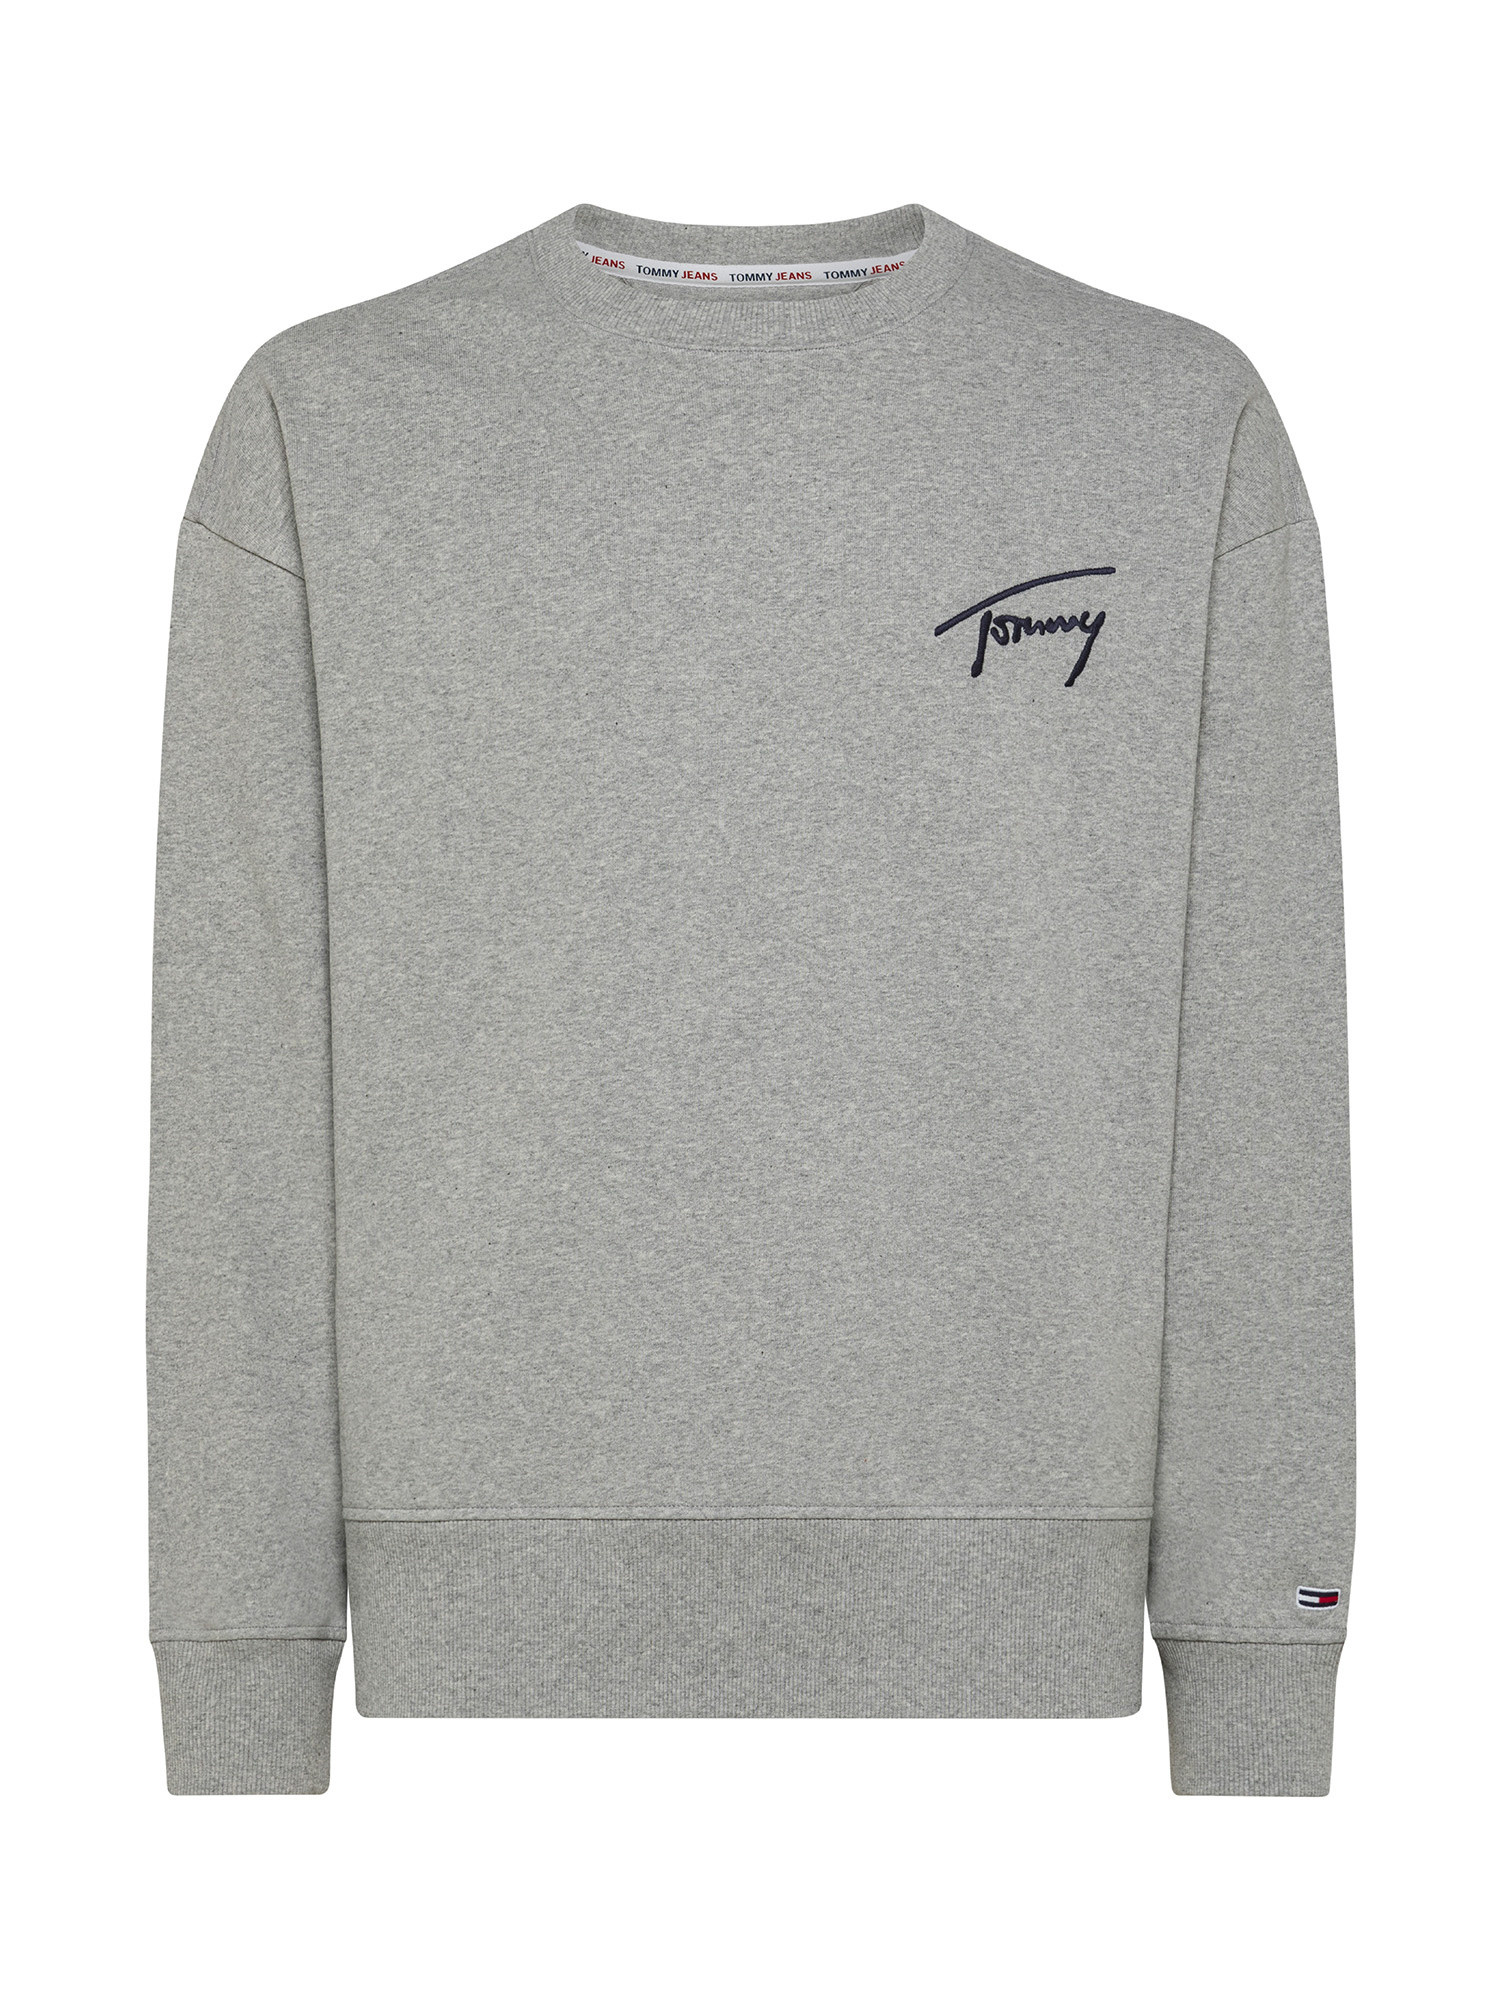 Tommy Jeans - Sweatshirt with signature logo, Grey, large image number 0